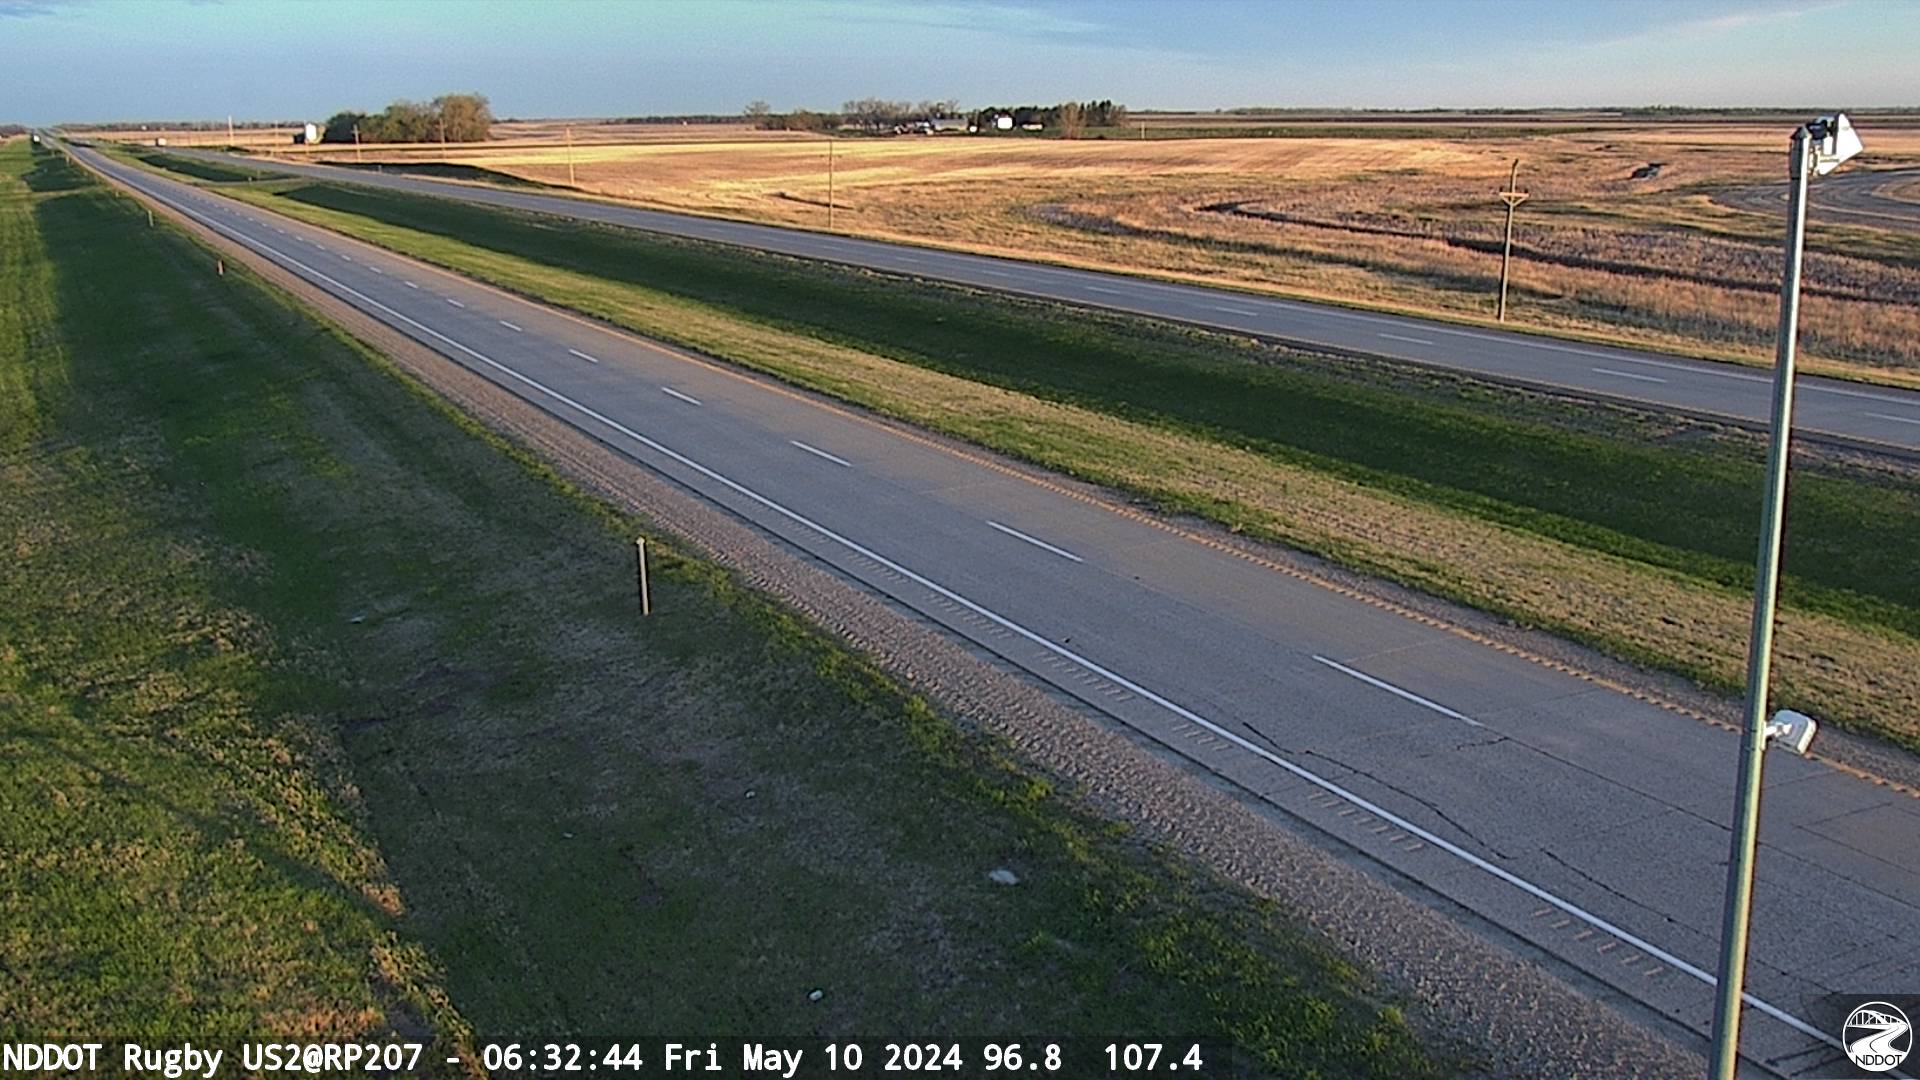 Rugby - West (US 2 MP 207.3) - NDDOT